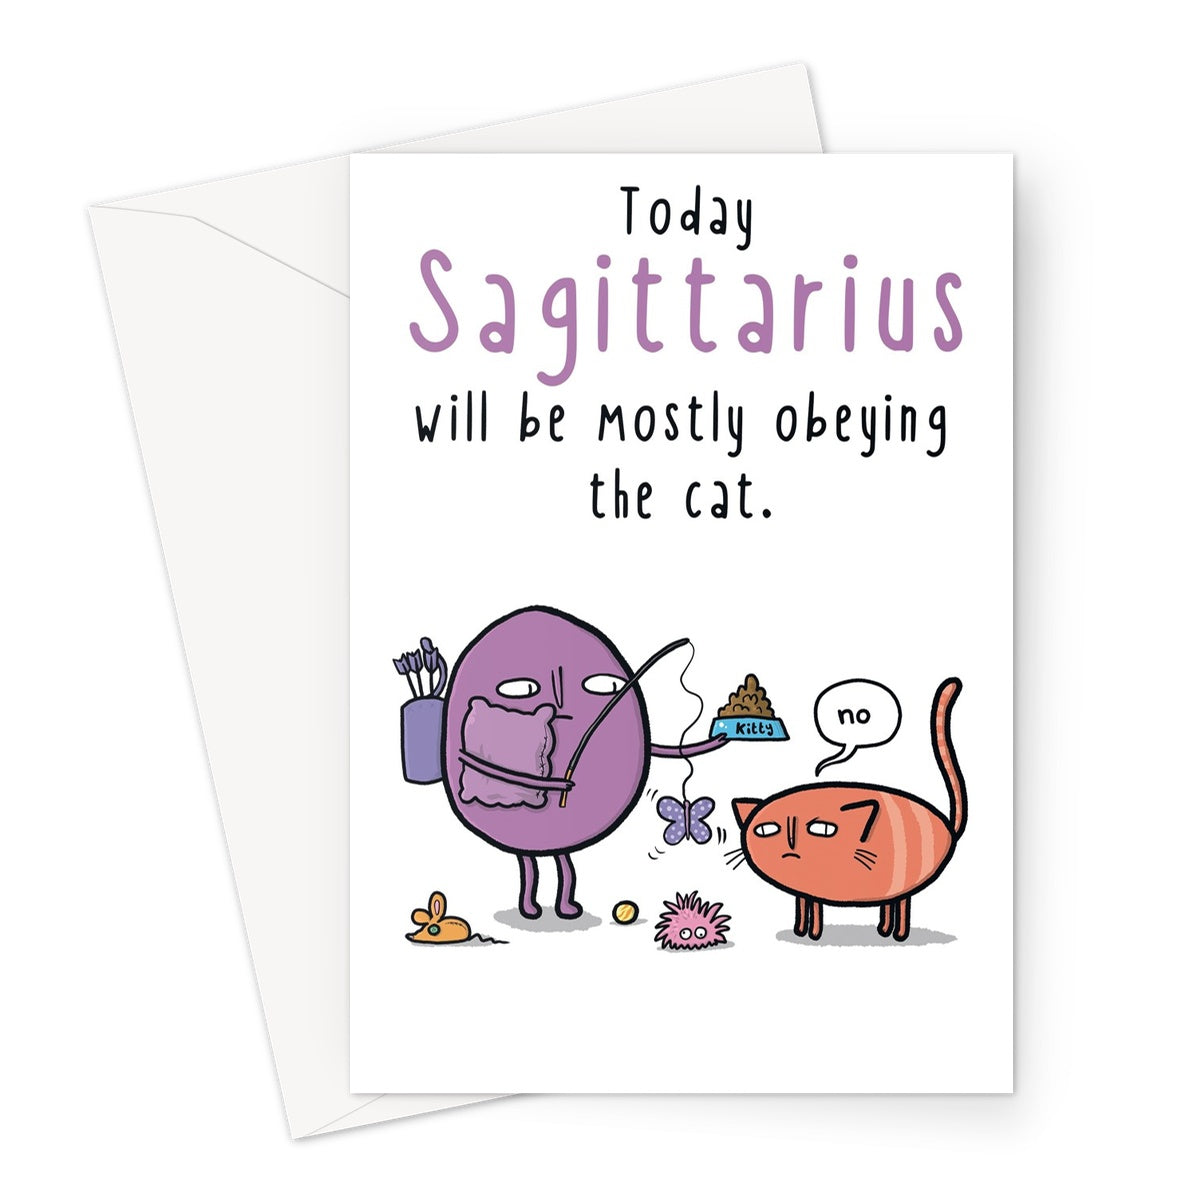 Zodiacpie - Sagittarius obeying the cat Greeting Card